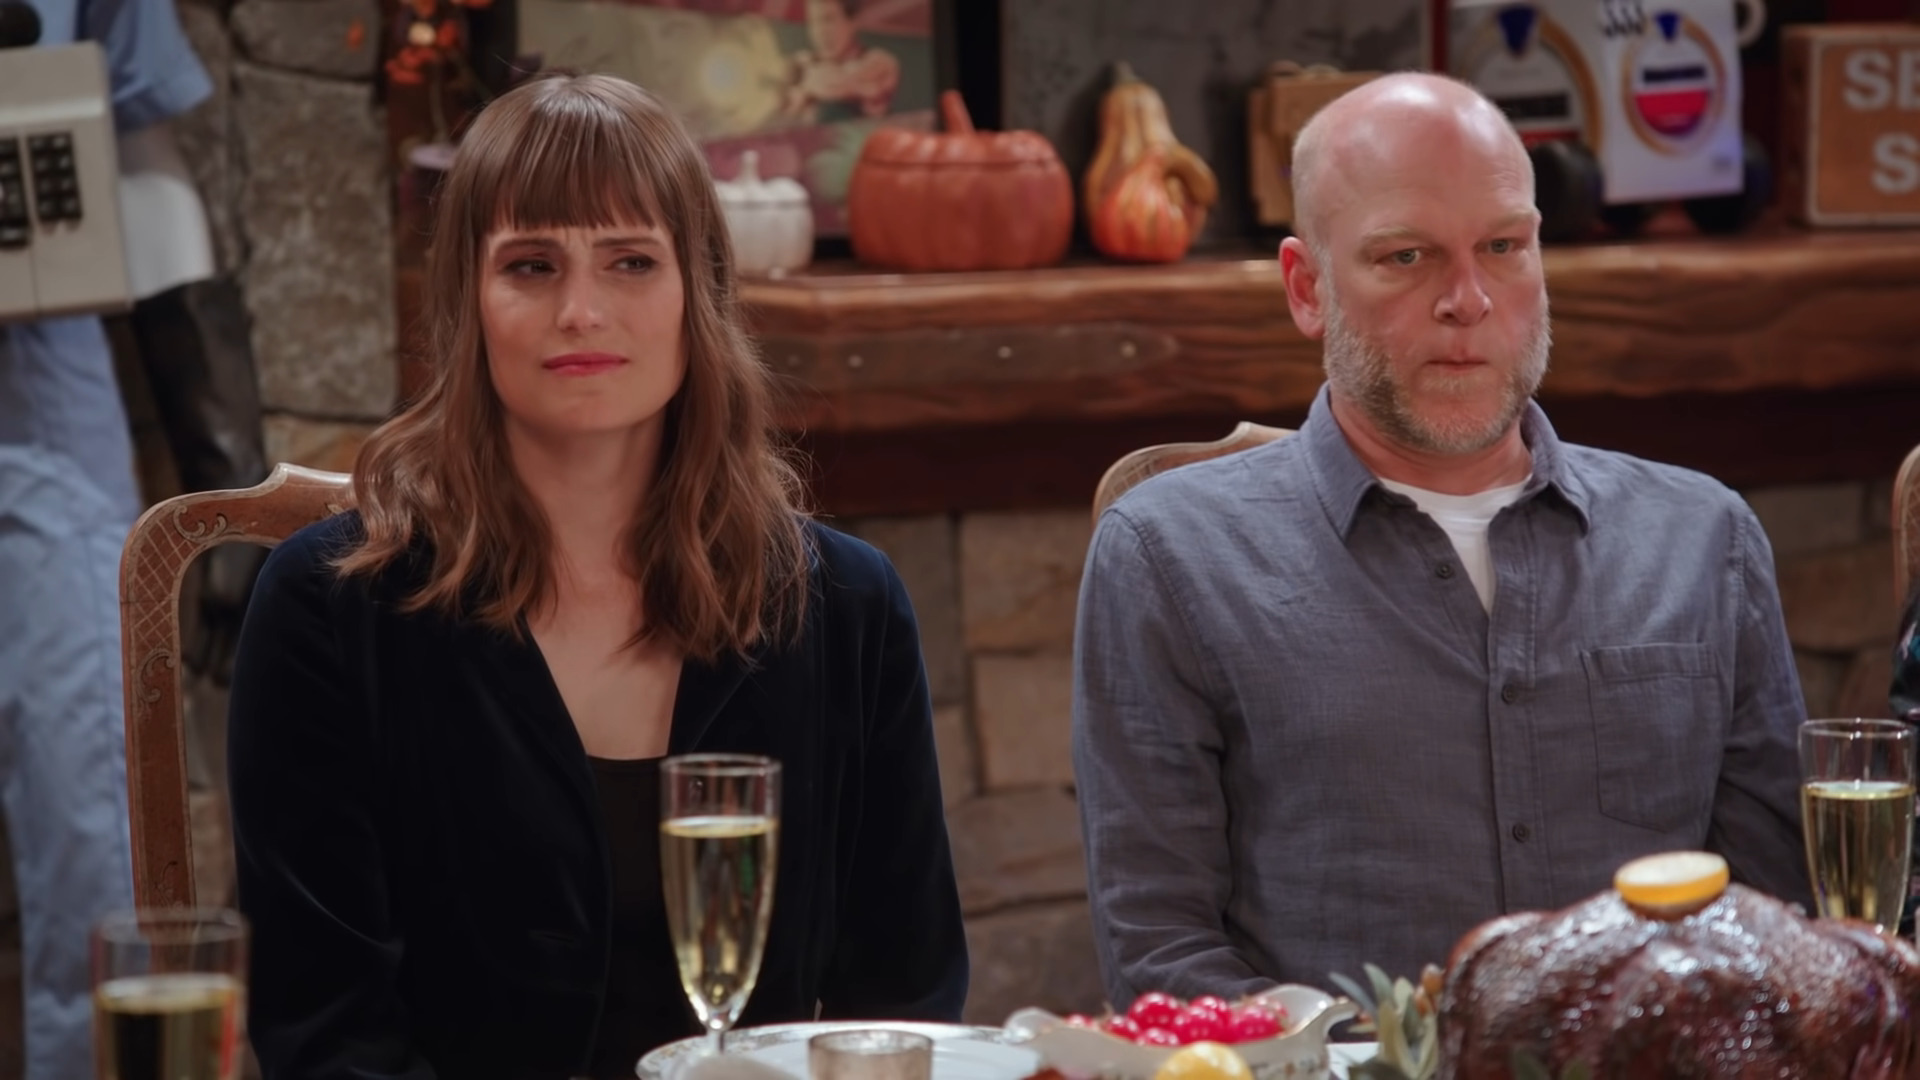 Morgan Webb and Adam Sessler return to G4 in A Very Special G4 Reunion Special